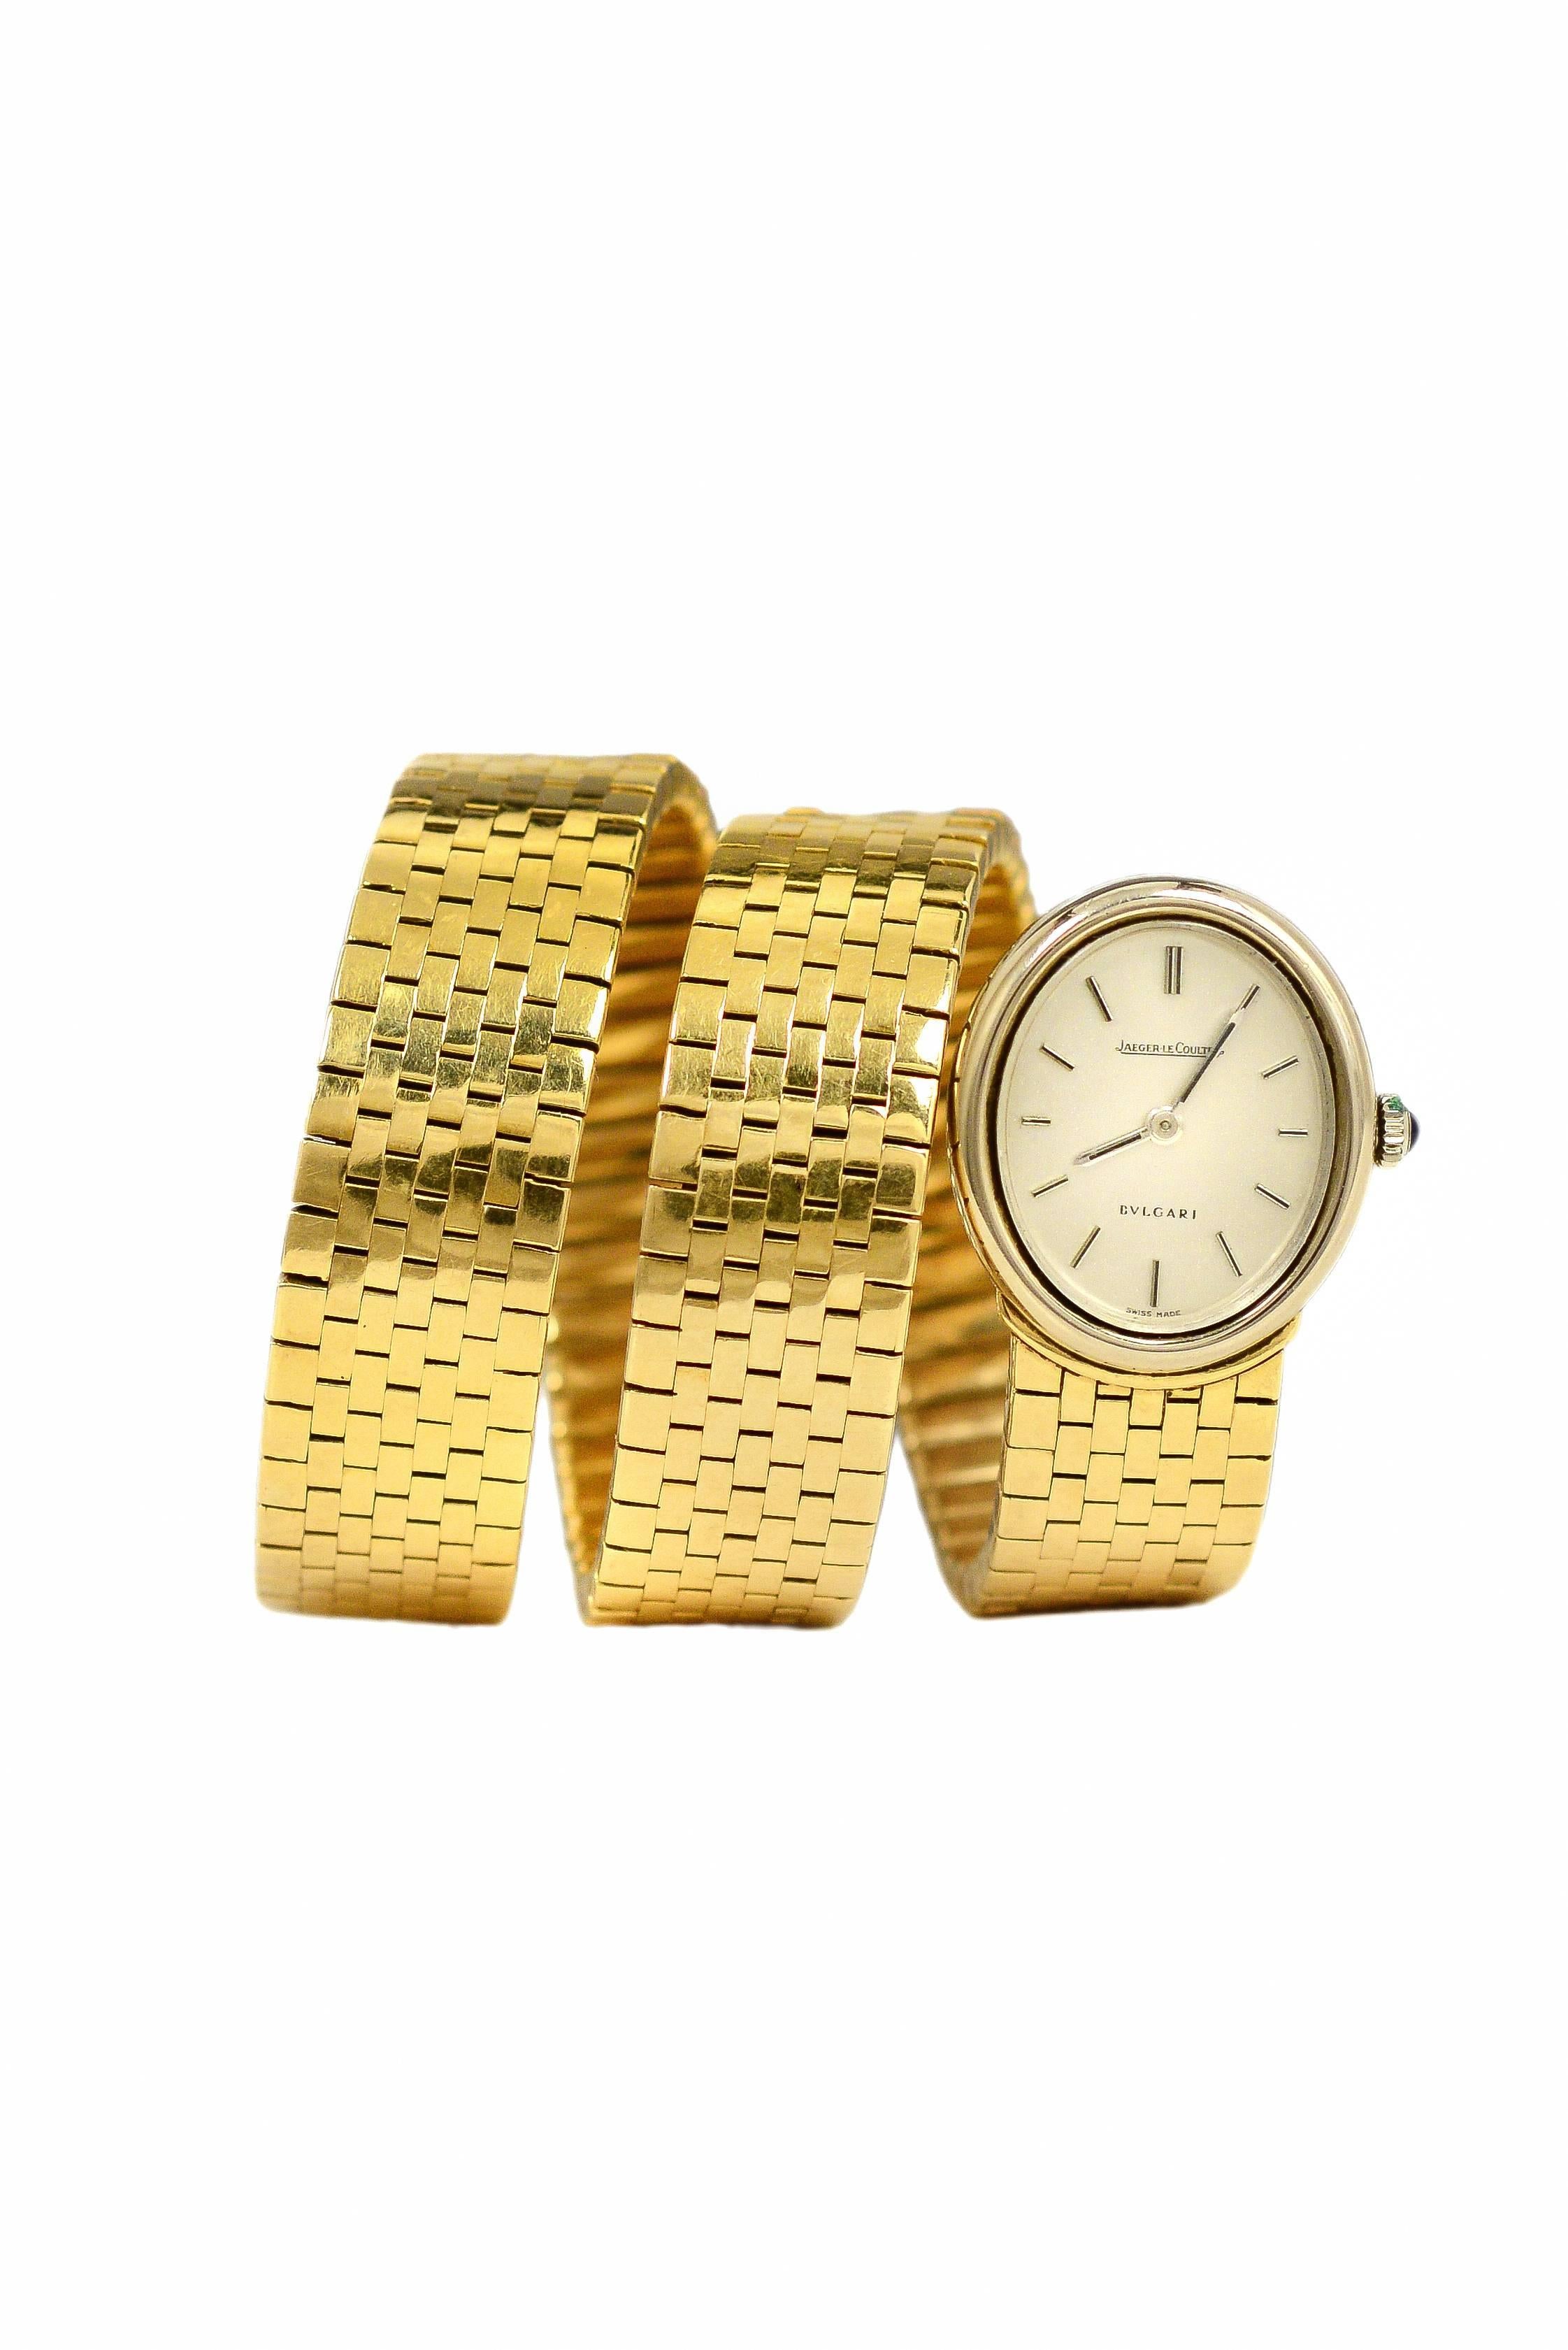 Highly-unusual Bulgari 18K gold snake watch with yellow gold brick-link coil band and large white gold oval case housing Jaeger LeCoultre movement. Stamped with serial number on caseback and BULGARI 750 at tail, dial signed Jaeger LeCoultre and